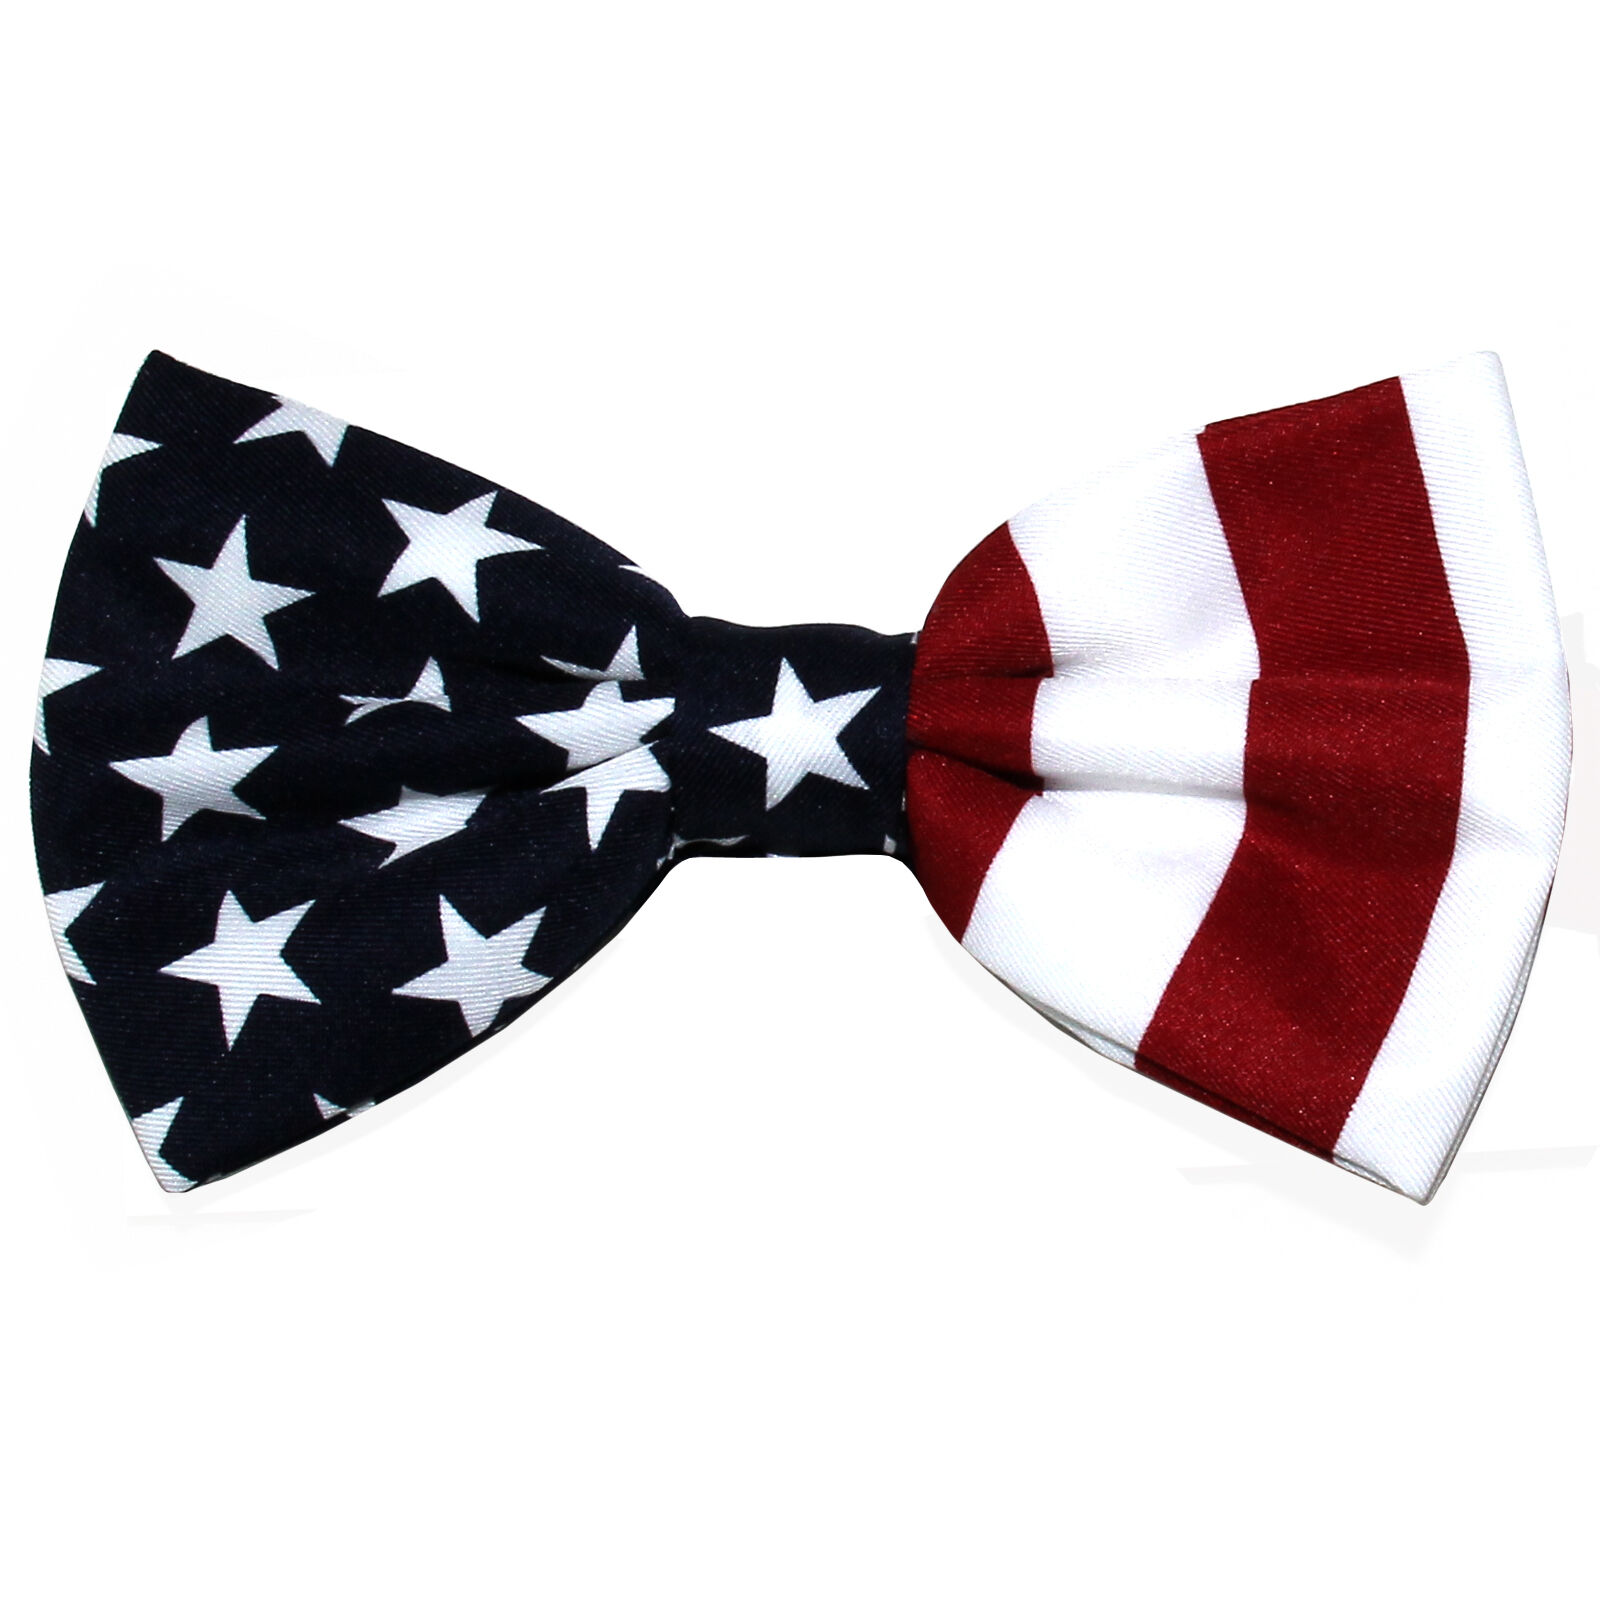 New Formal Men's Pre Tied Bow Tie July 4th American Flag Red White Blue Party